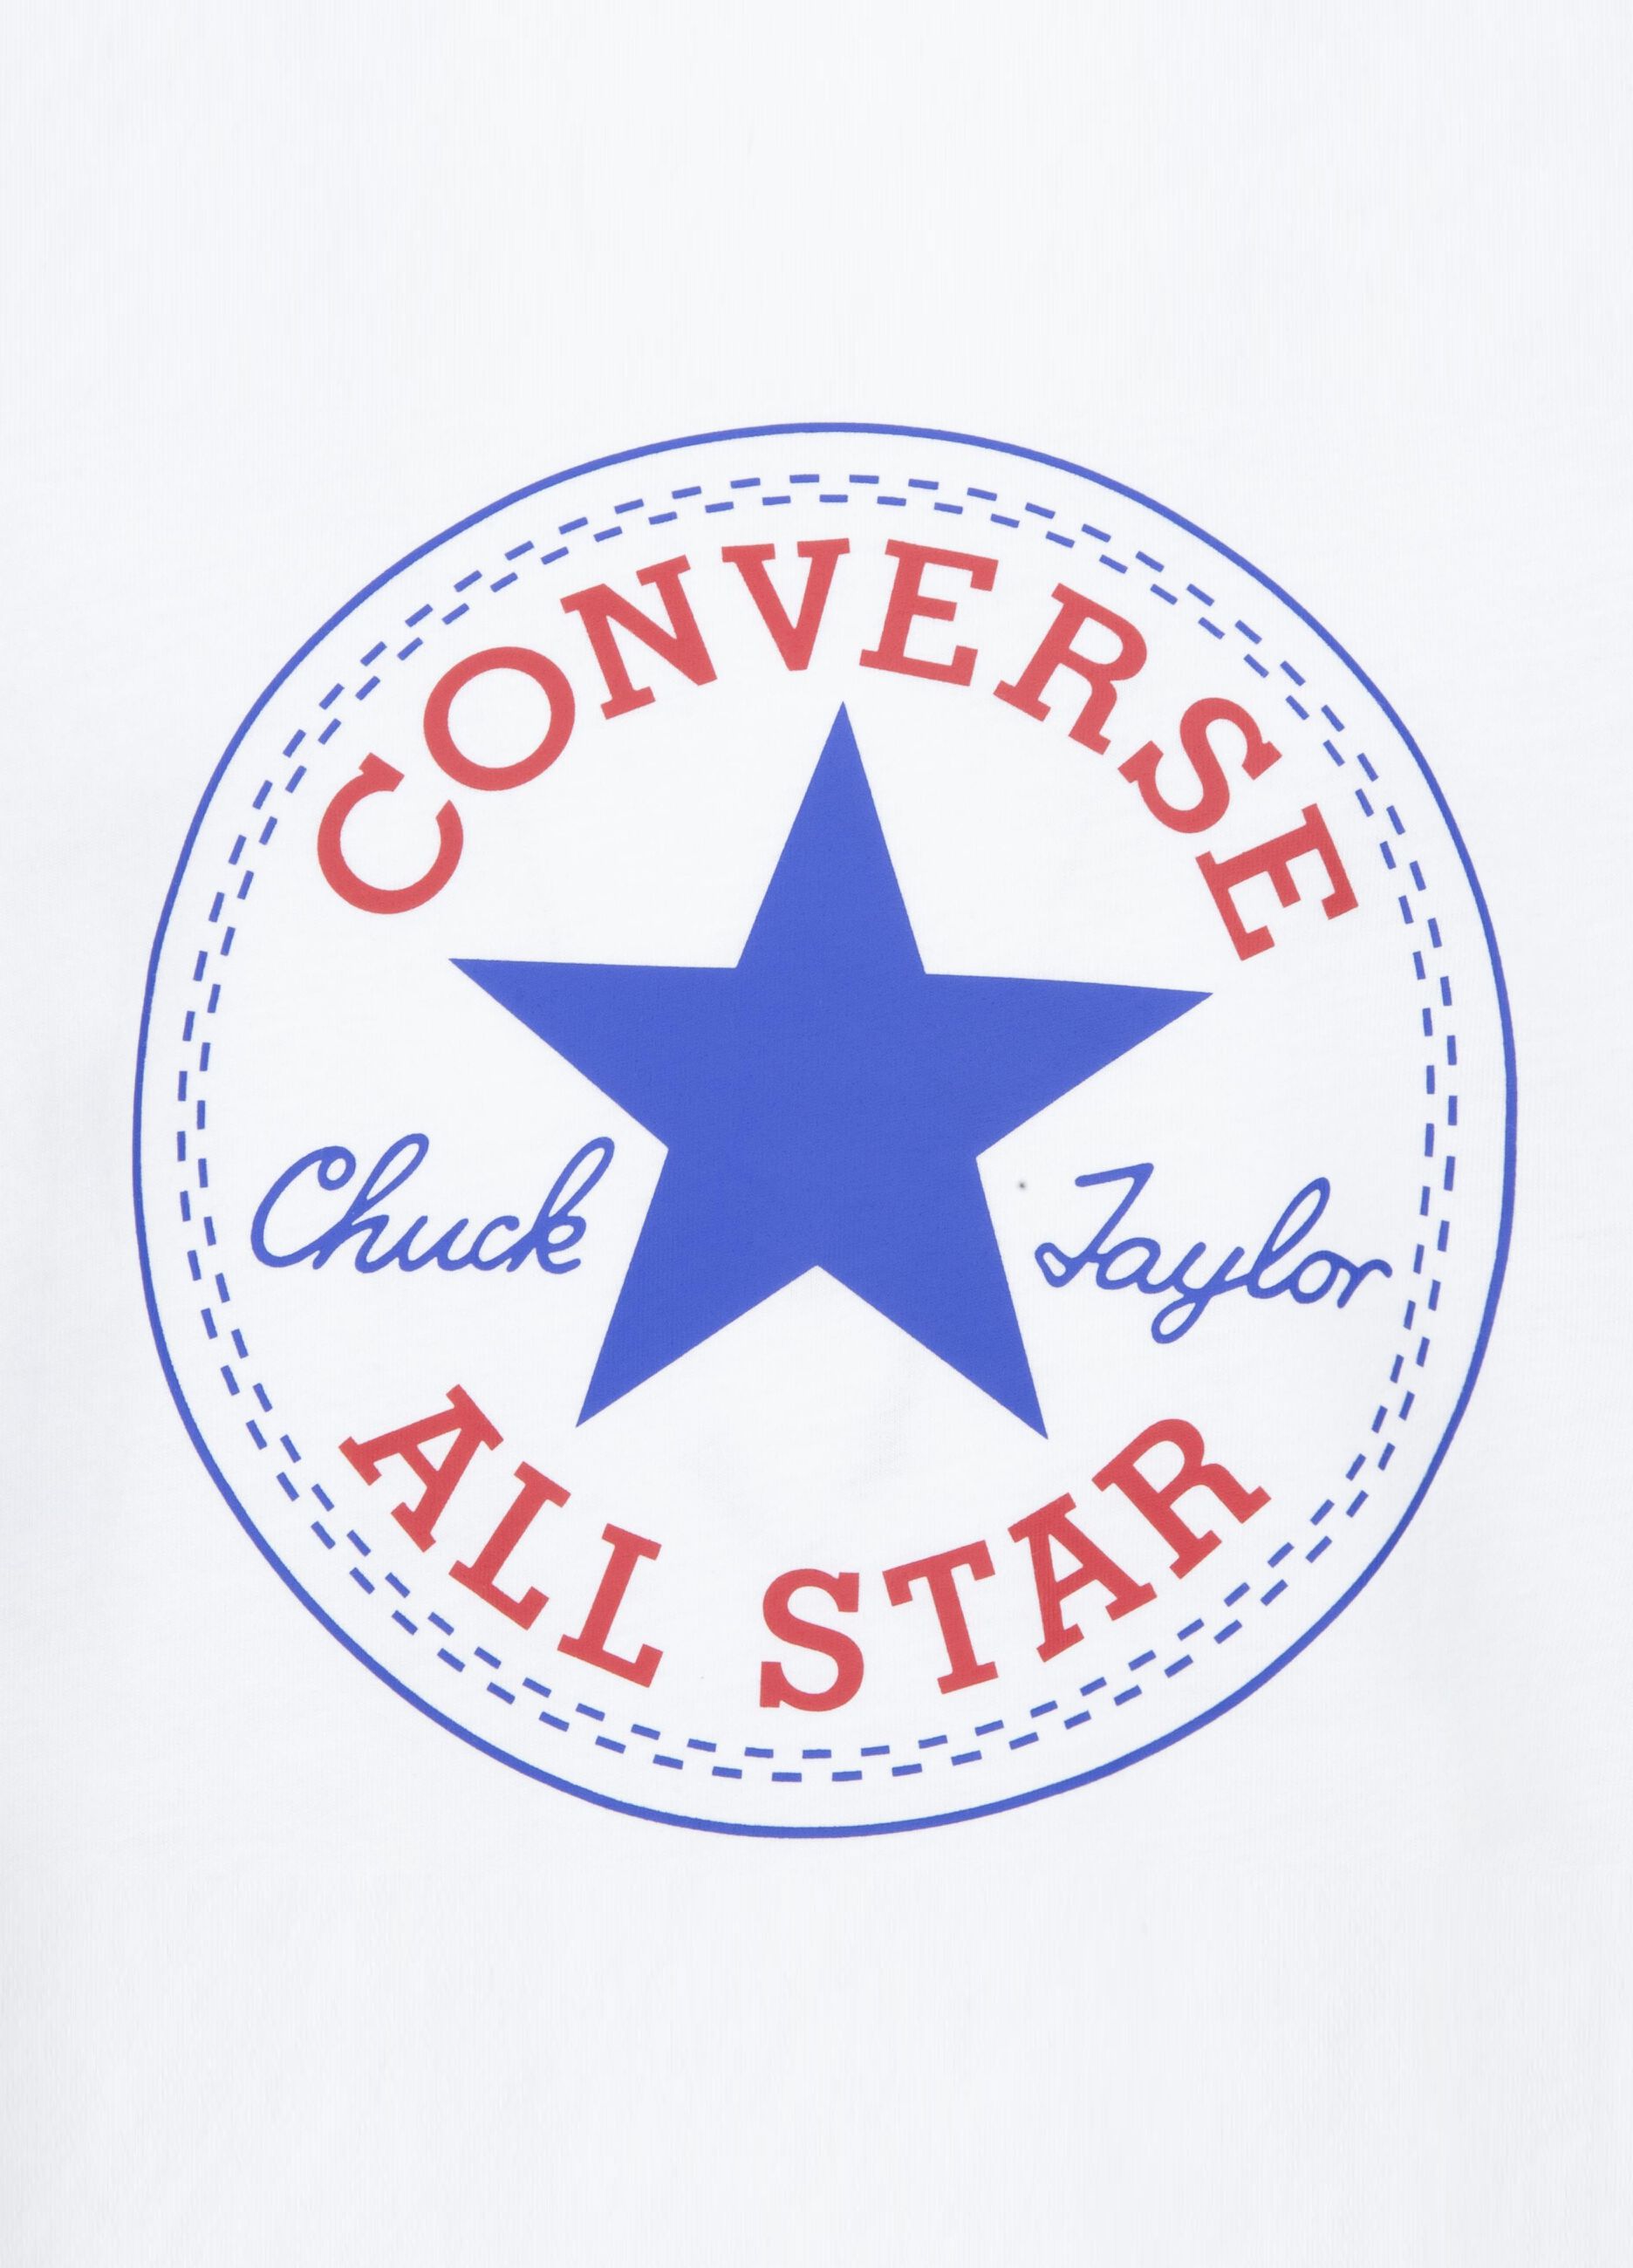 Round-neck T-shirt with Chuck Taylor logo print